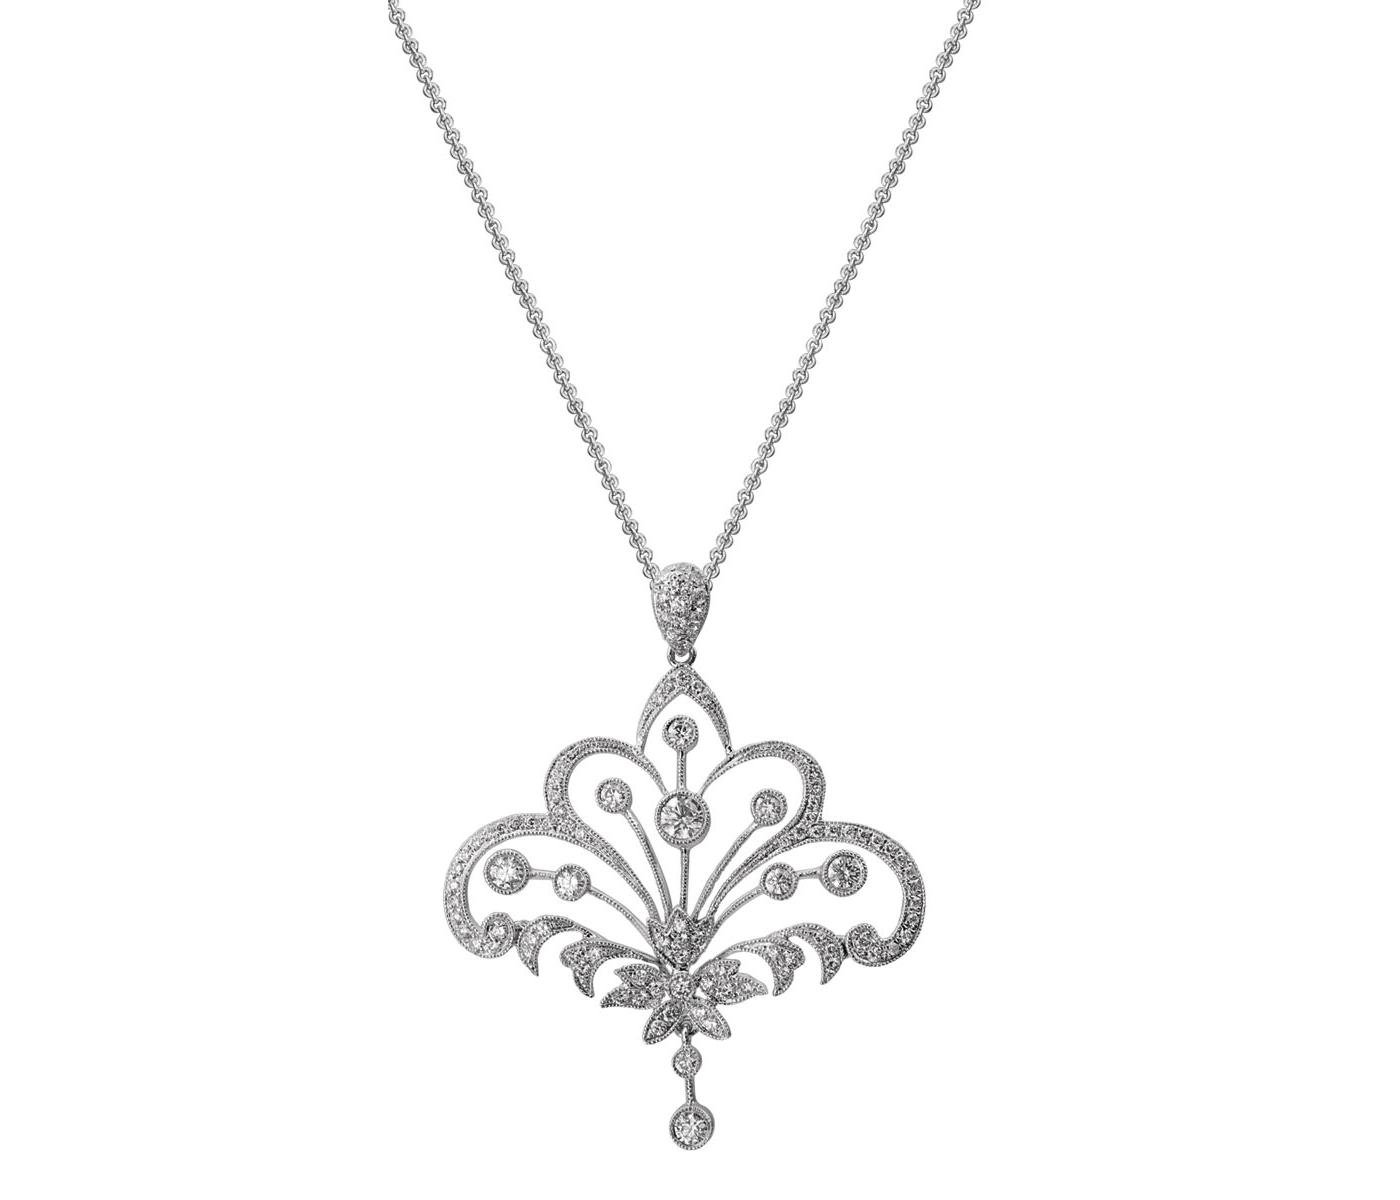 Pendant by Artistry Limited